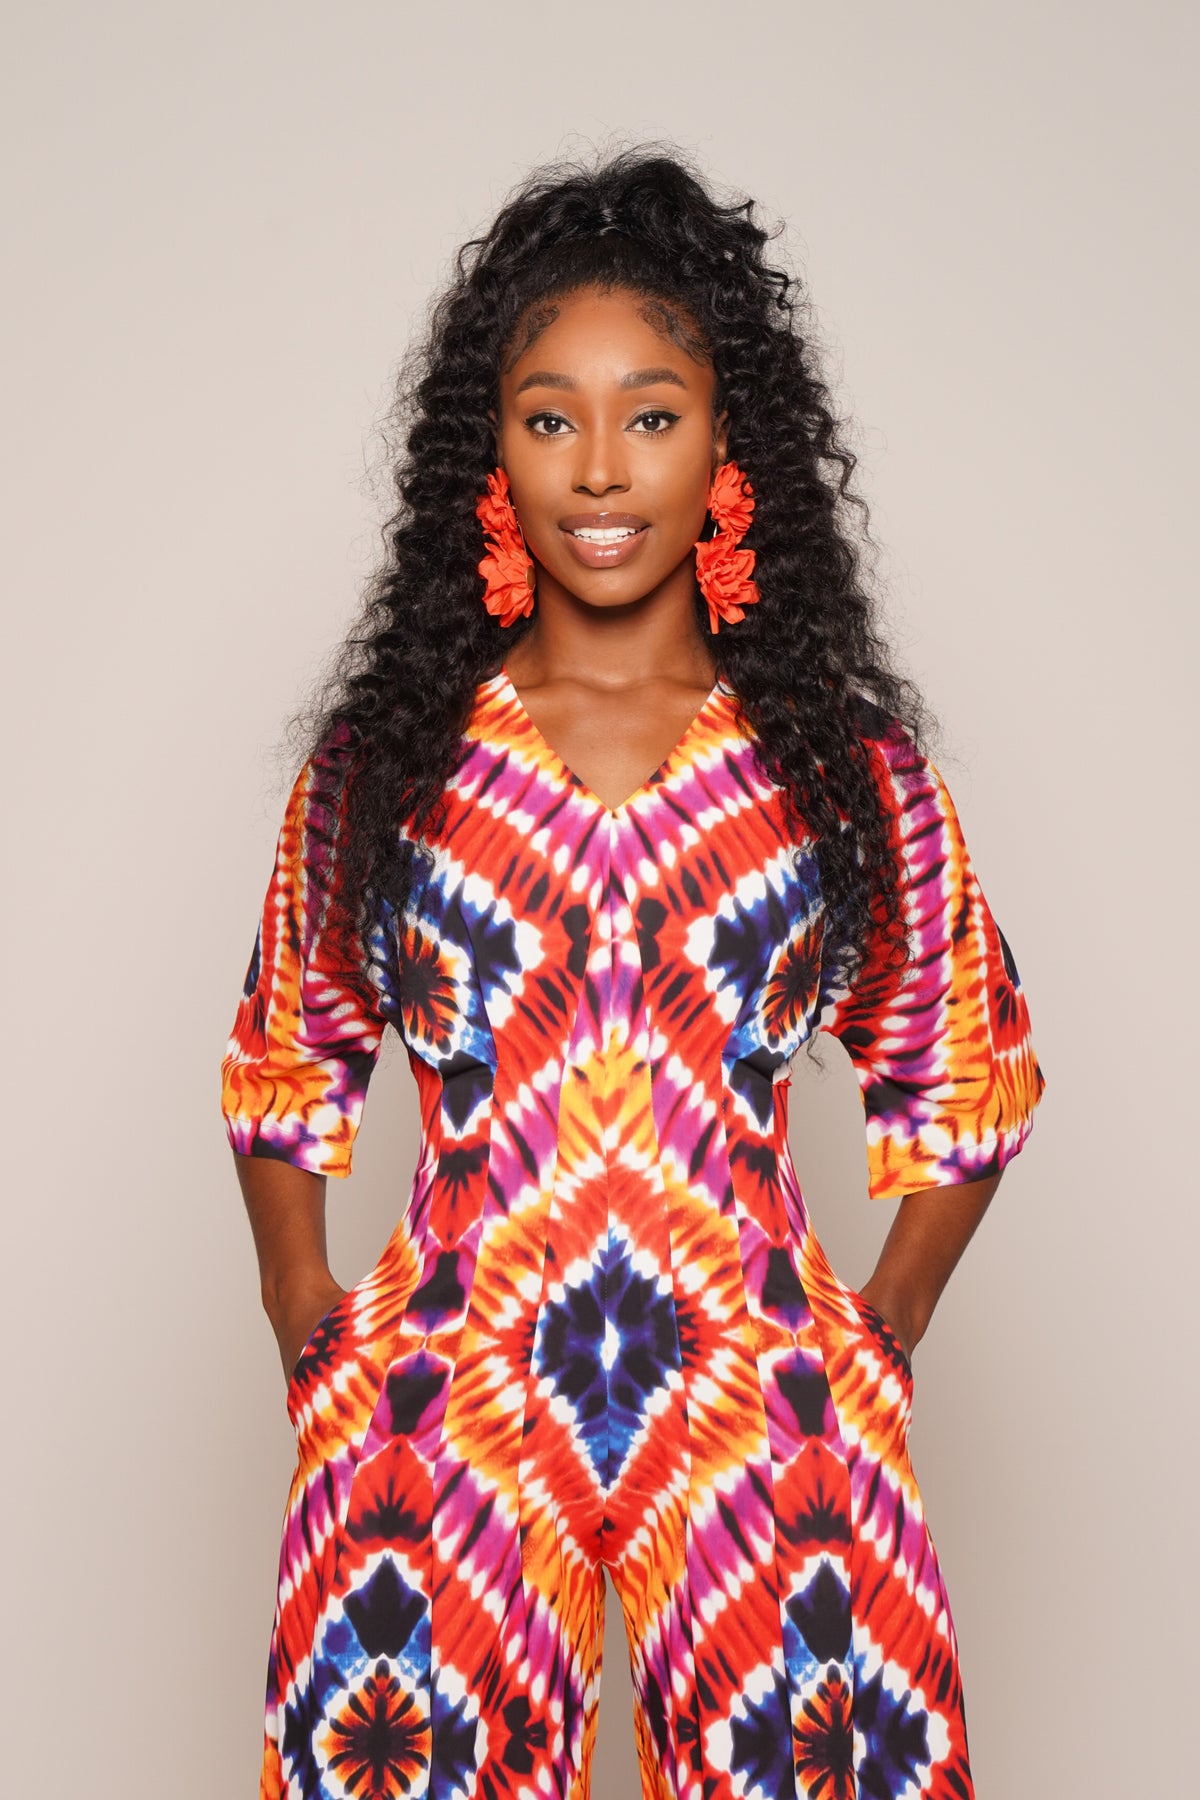 Shop Lili Creation For the Latest African Trends | Stay In Style